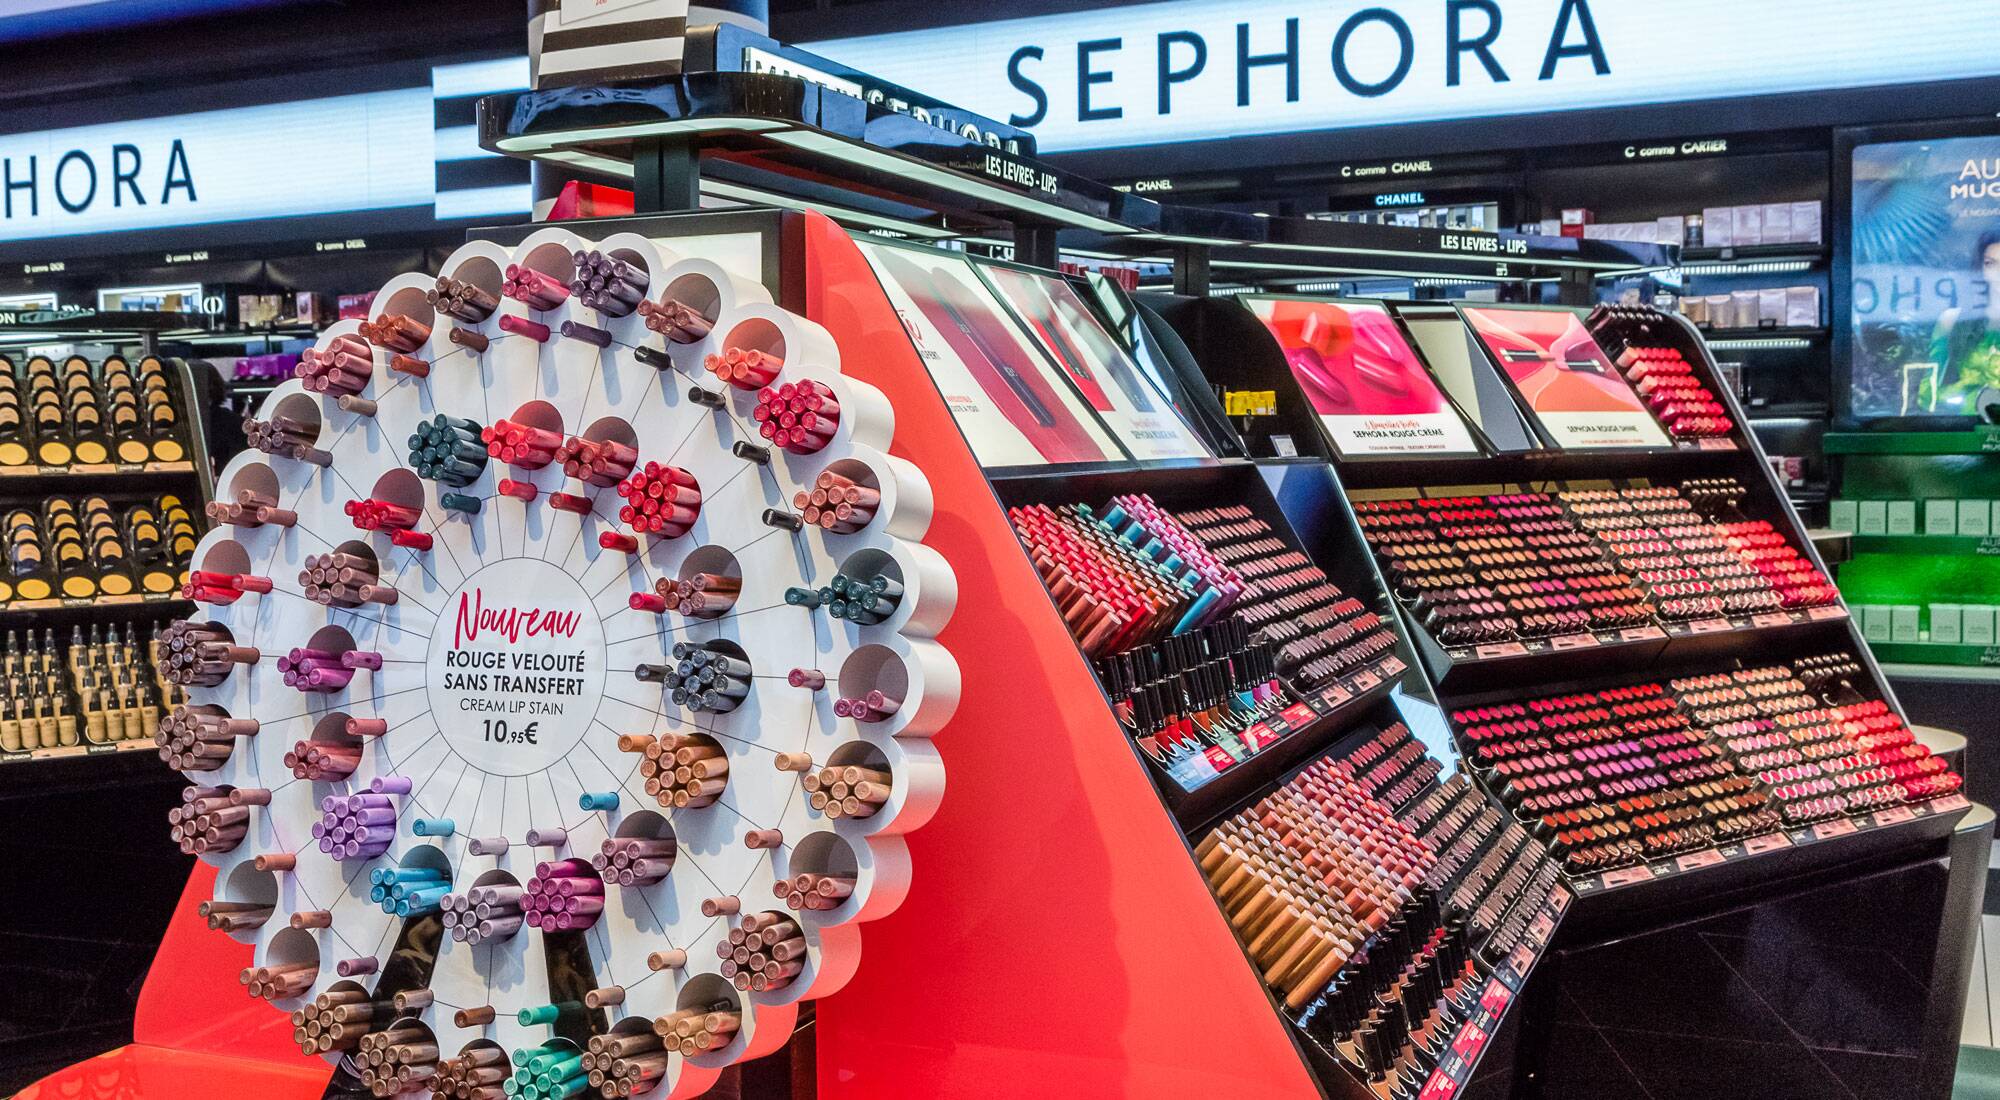 LVMH - Following the loss of two SEPHORA employees in